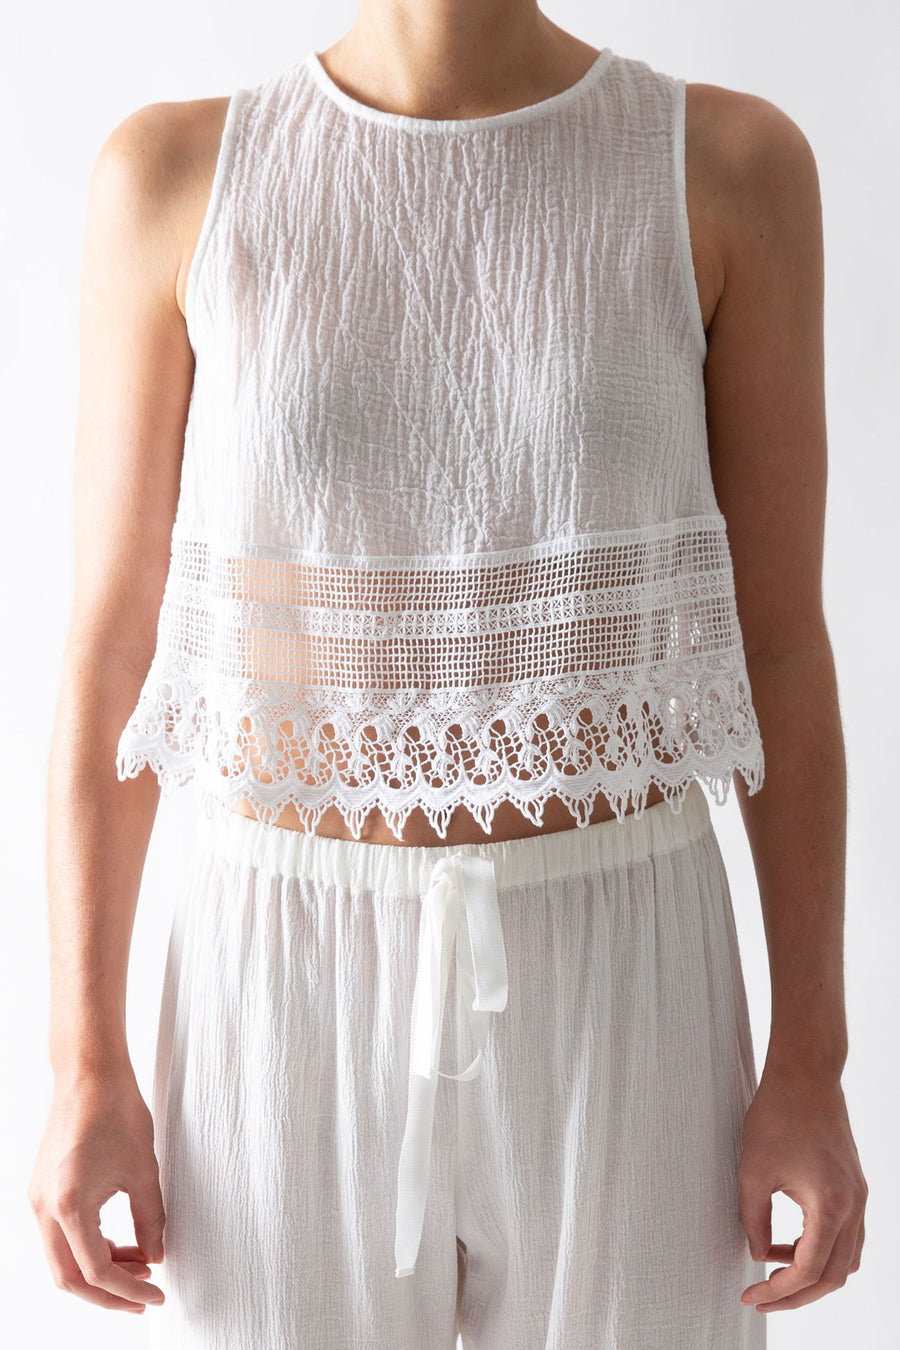 This is a detail photo of a cotton gauze white top with lace trim that meets the waistline of the pants.